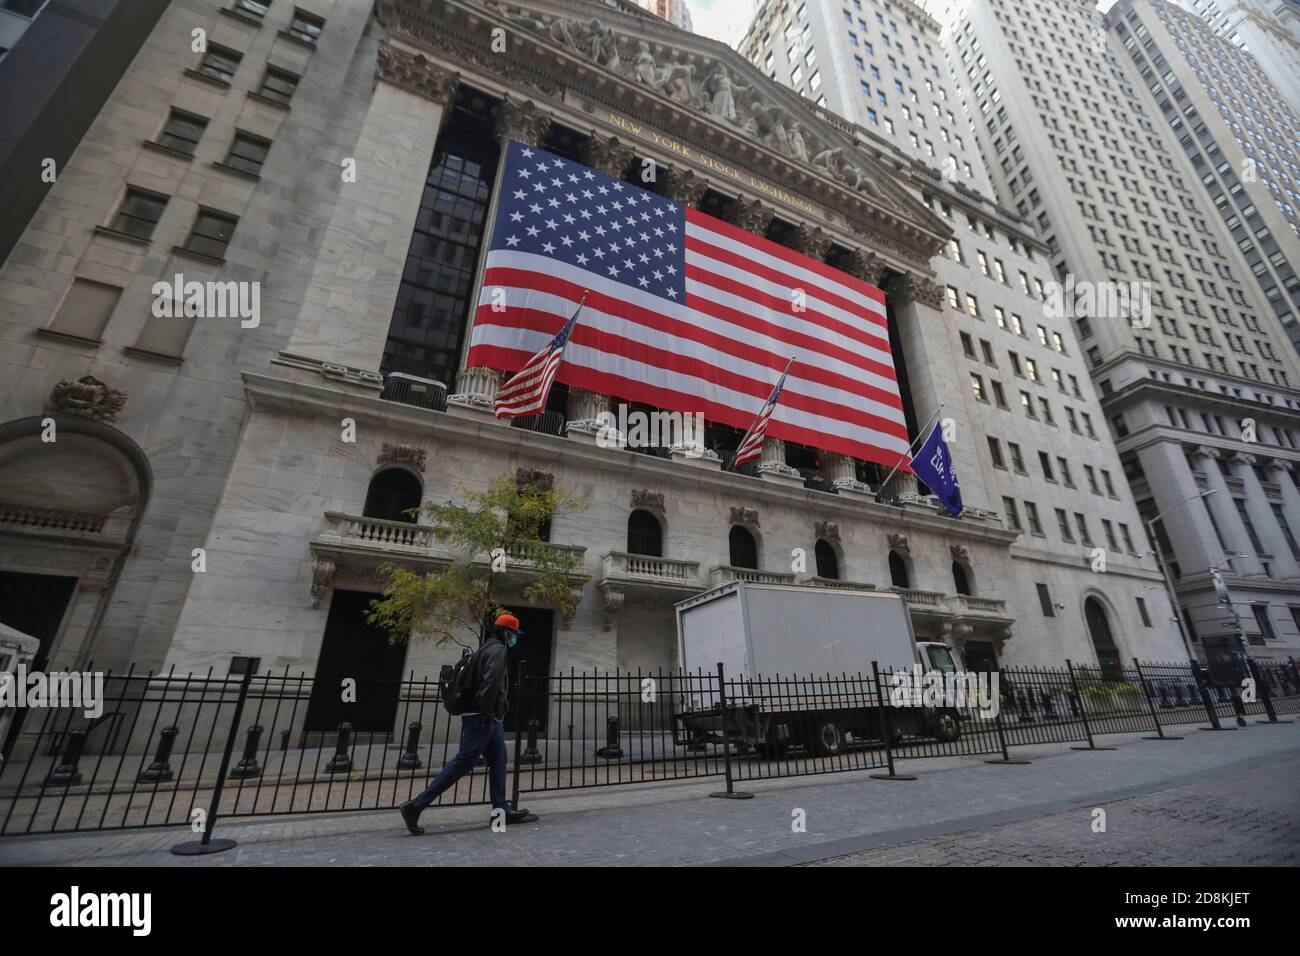 New York, USA. 30th Oct, 2020. A pedestrian walks past the New York Stock Exchange in New York, the United States, Oct. 30, 2020. U.S. stocks closed lower on Friday, as a pronounced slide in tech sector weighed on the market. The Dow Jones Industrial Average fell 157.51 points, or 0.59 percent, to 26,501.60. The S&P 500 was down 40.15 points, or 1.21 percent, to 3,269.96. The Nasdaq Composite Index shed 274.00 points, or 2.45 percent, to 10,911.59. Credit: Wang Ying/Xinhua/Alamy Live News Stock Photo